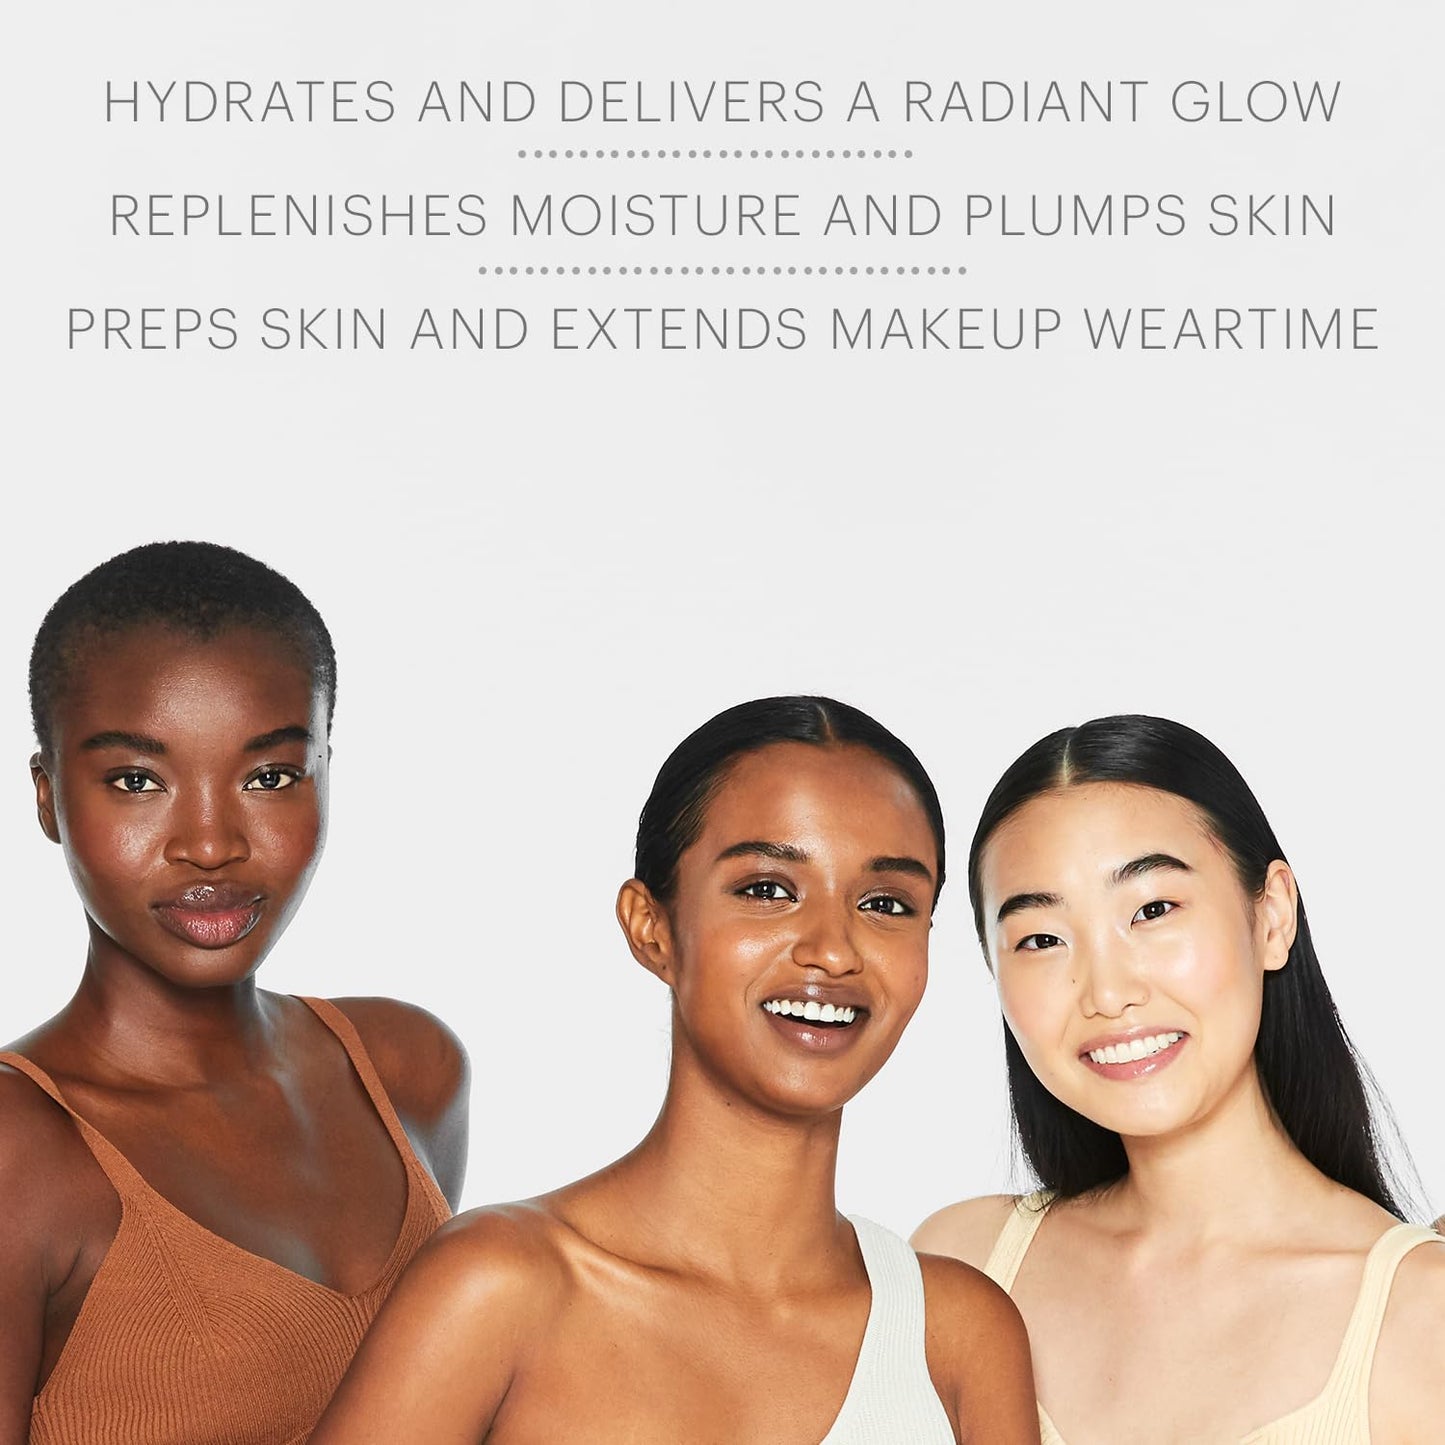 Glo Skin Beauty Hydrating Primer with Hyaluronic Acid - Replenish Moisture and Plump Skin for Smoother Makeup Application, for Dry + Dehydrated Skin, Dewy Finish